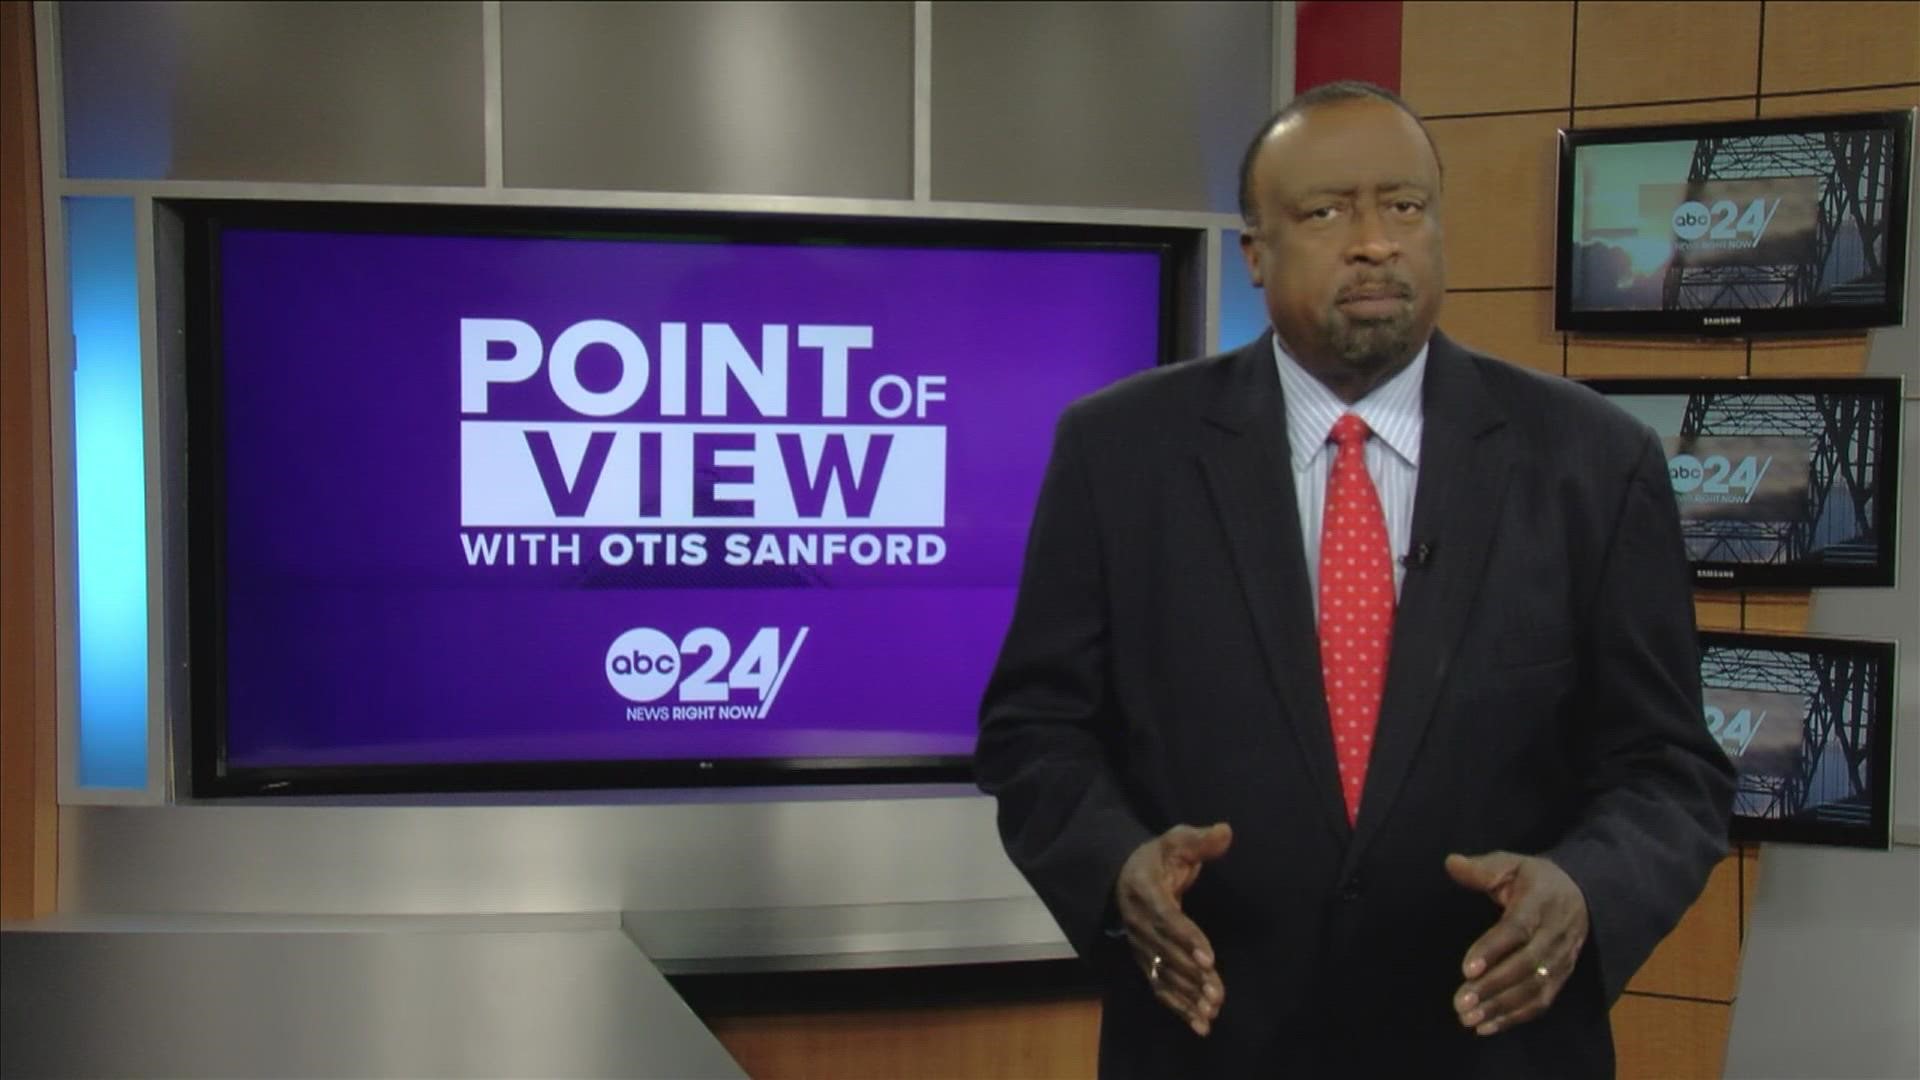 ABC24 political analyst and commentator Otis Sanford shared his point of view on the abortion debate that continues in the Mid-South.